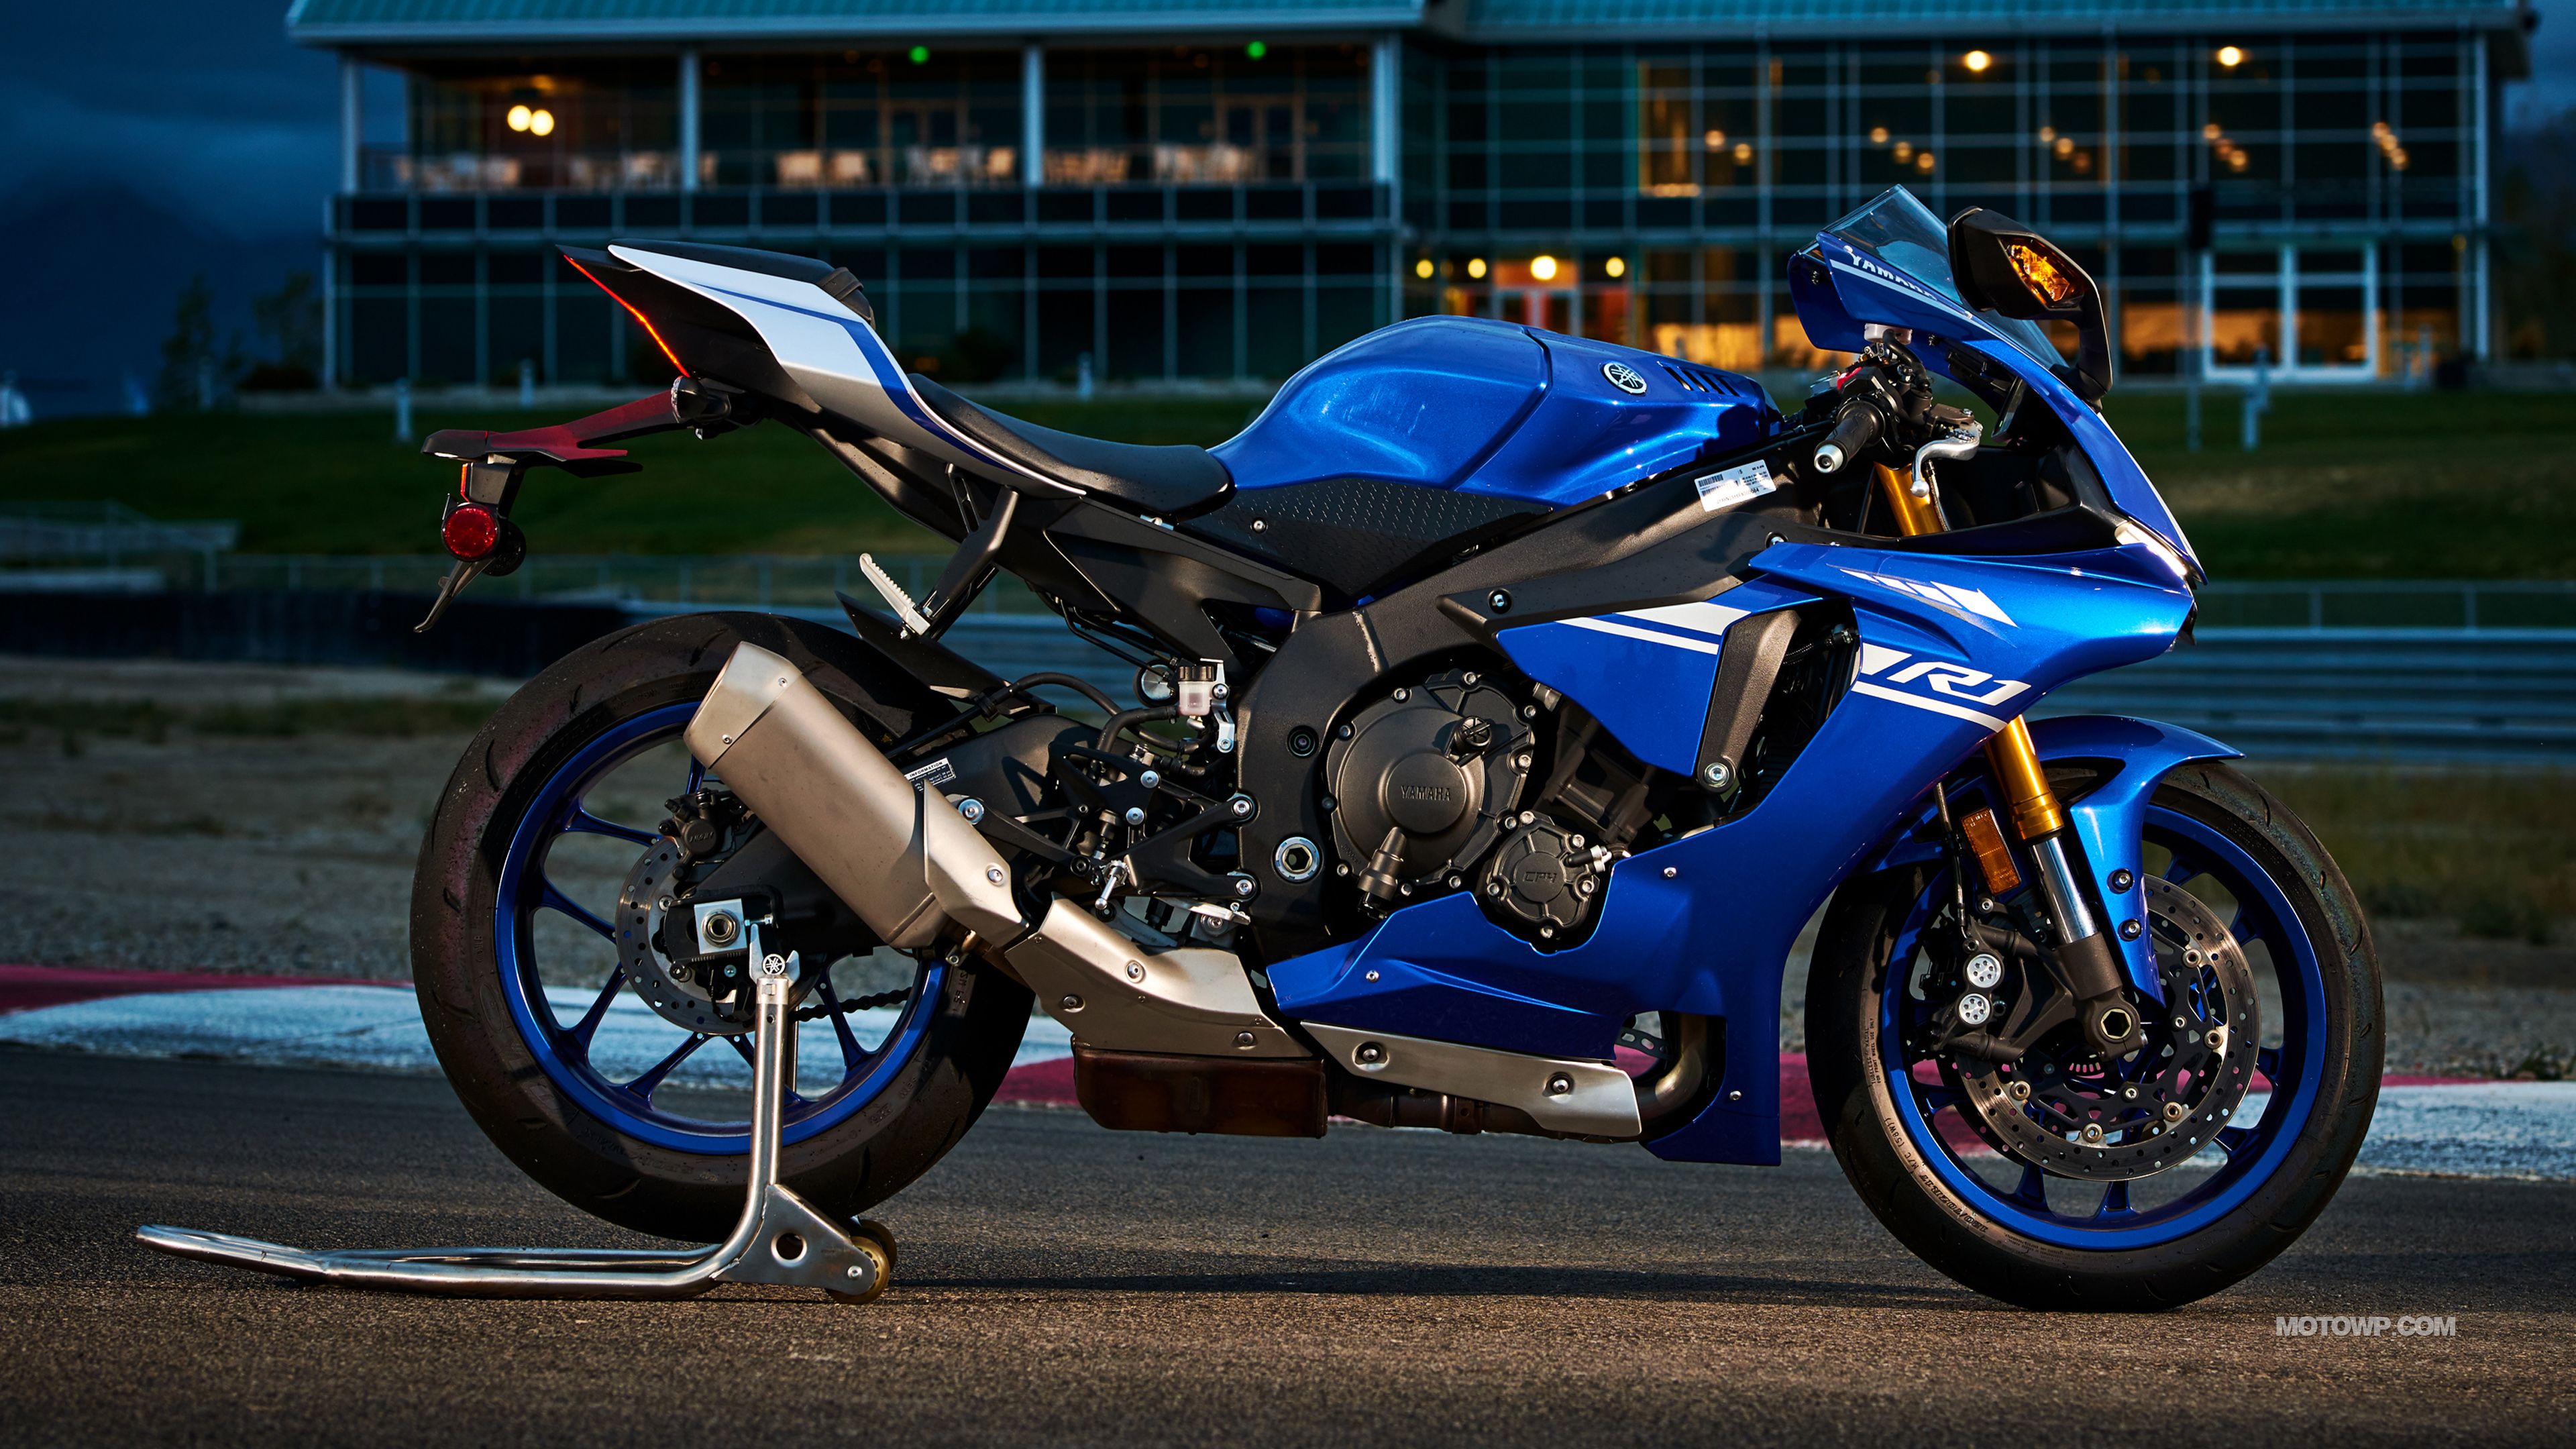 YZF-R1 Wallpapers - Wallpaper Cave